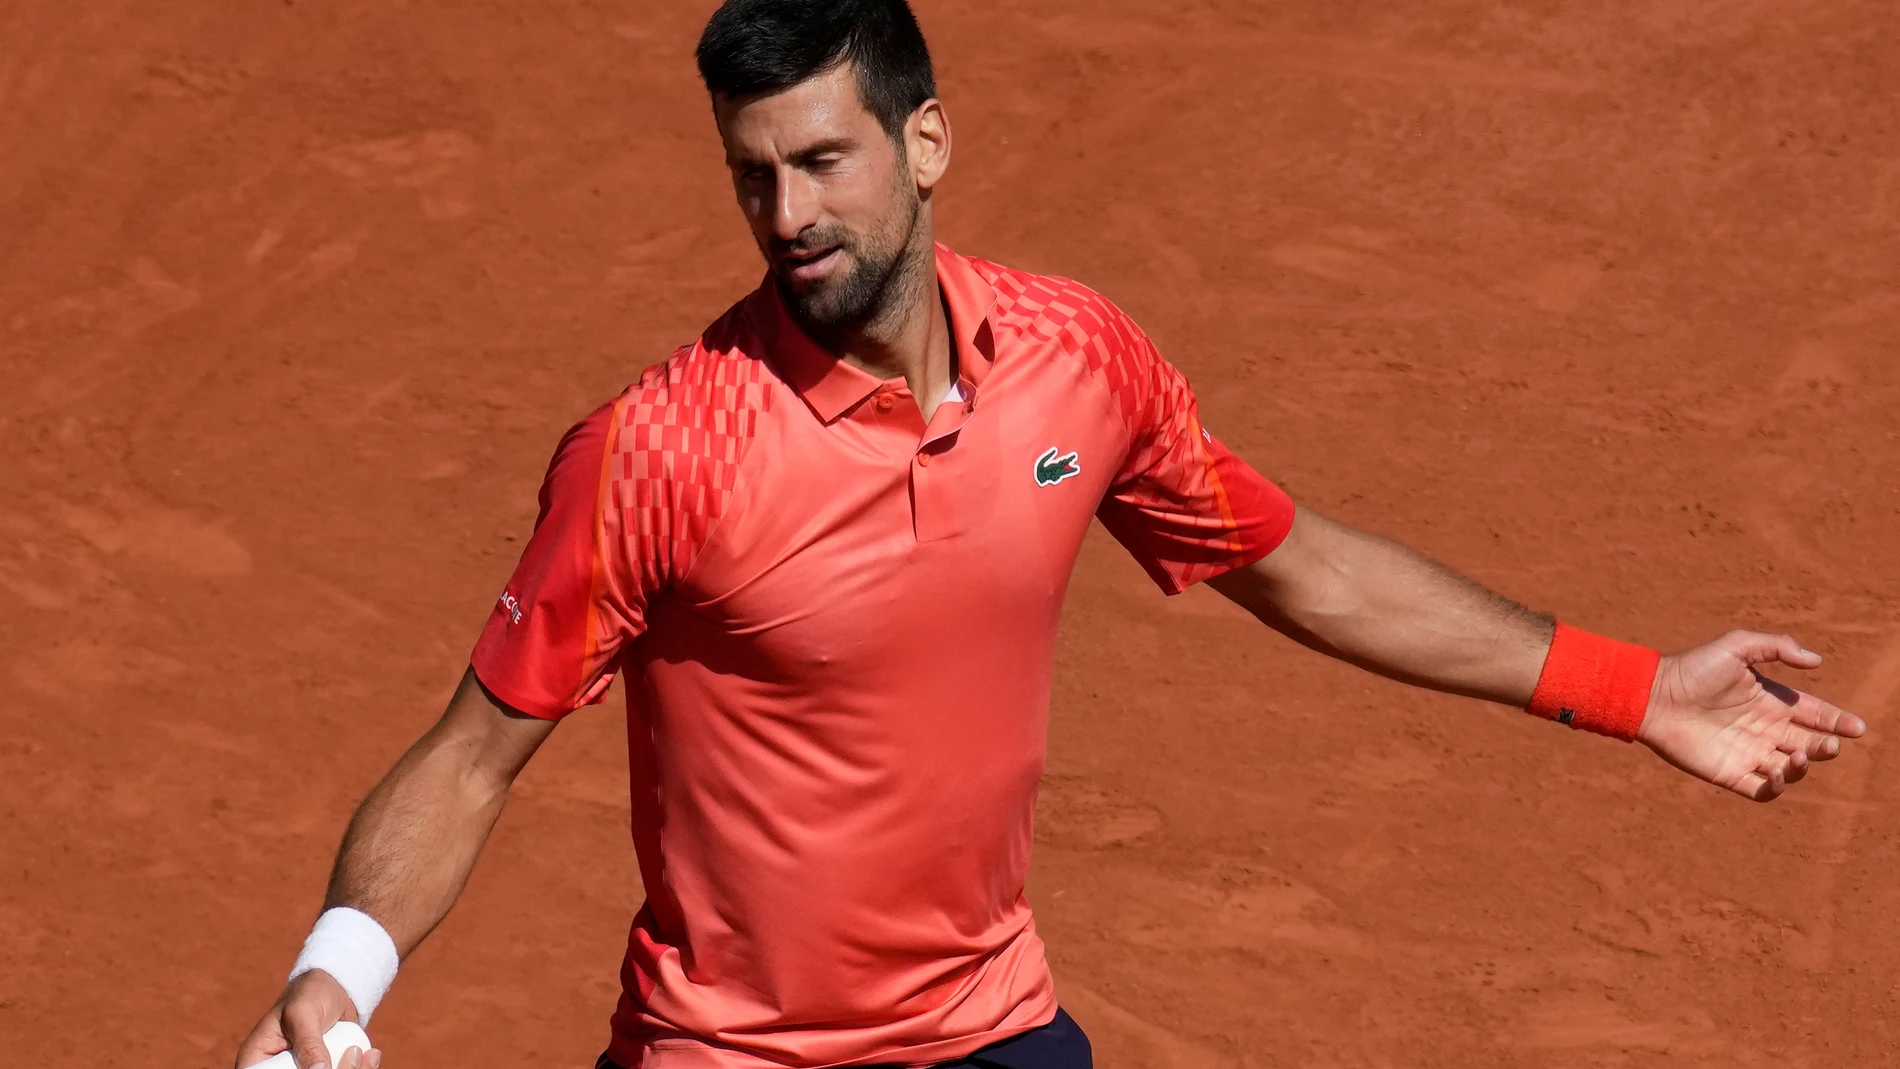 Serbia's Novak Djokovic reacts during his third round match of the French Open tennis tournament against Spain's Alejandro Davidovich Fokina, at the Roland Garros stadium in Paris, Friday, June 2, 2023. (AP Photo/Christophe Ena)